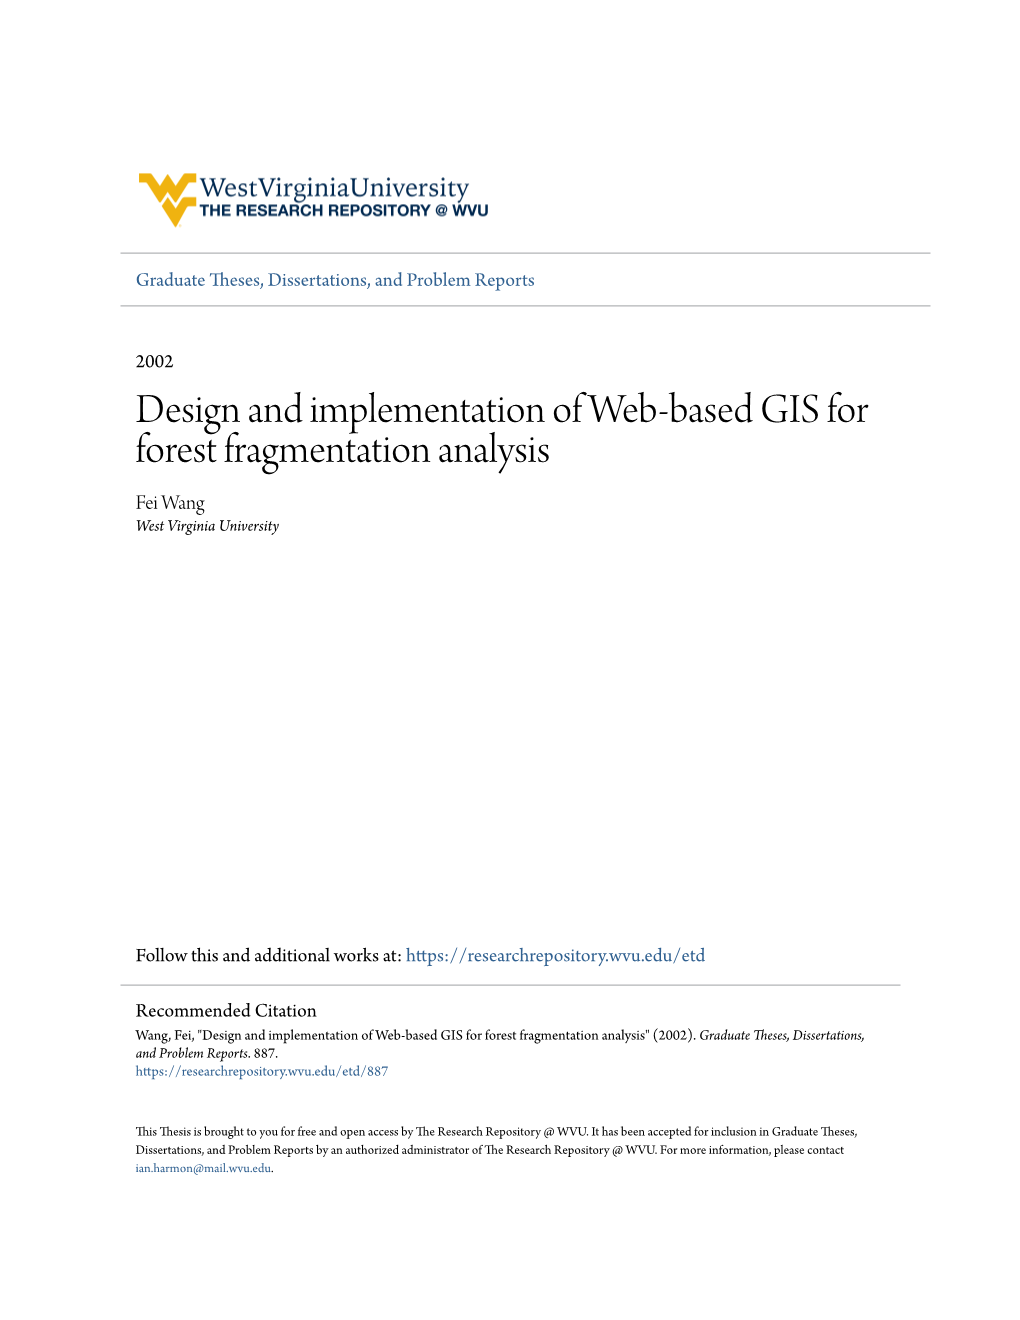 Design and Implementation of Web-Based GIS for Forest Fragmentation Analysis Fei Wang West Virginia University